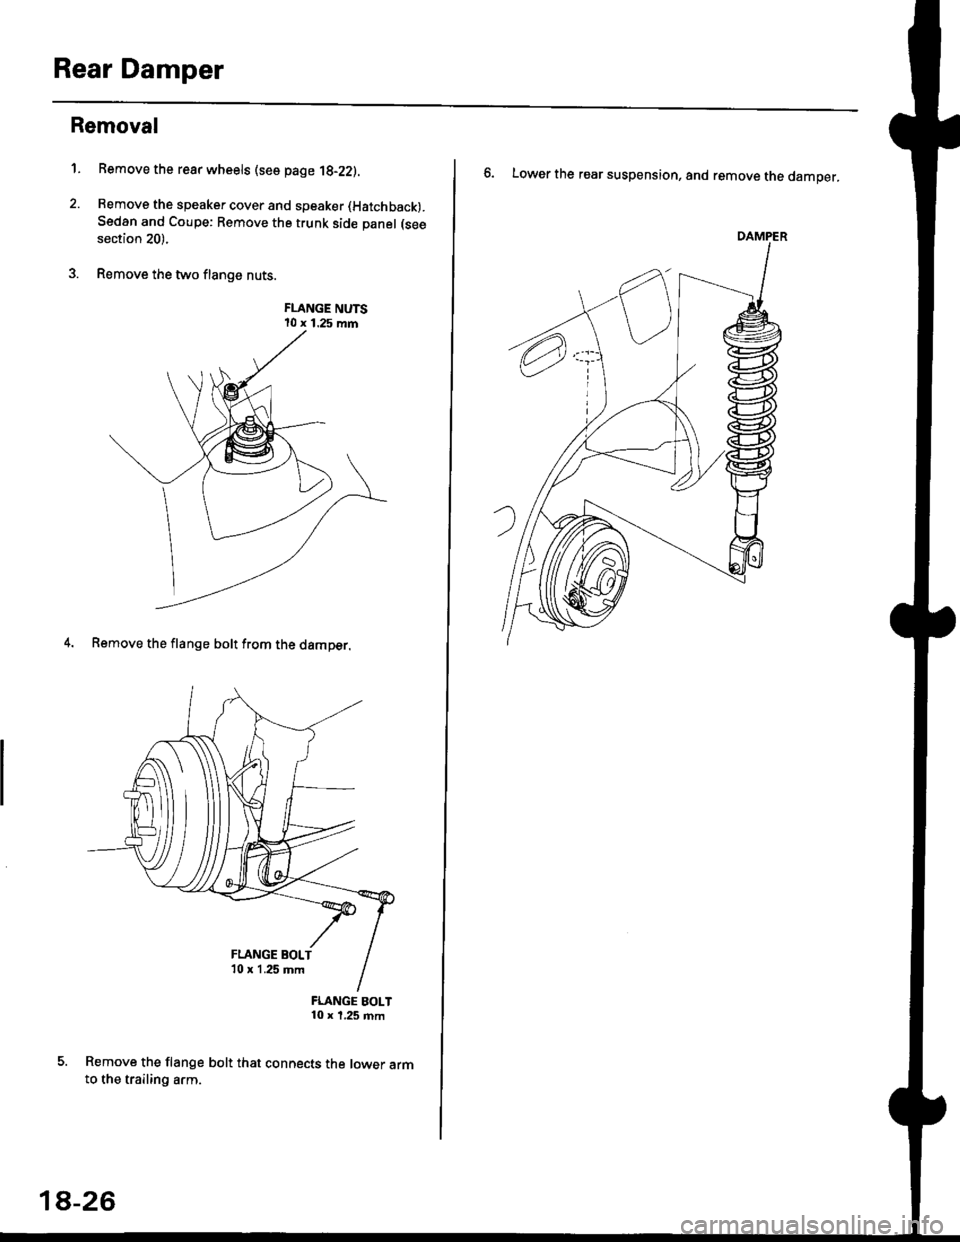 HONDA CIVIC 1999 6.G Workshop Manual Rear Damper
Removal
1. Bemove the rear wheels (see page 1g-22).
2. Remove the speaker cover and speaker (Hatchback).
Sedan and Coupe: Remove the trunk side panel (see
section 20).
3. Remove the two fl